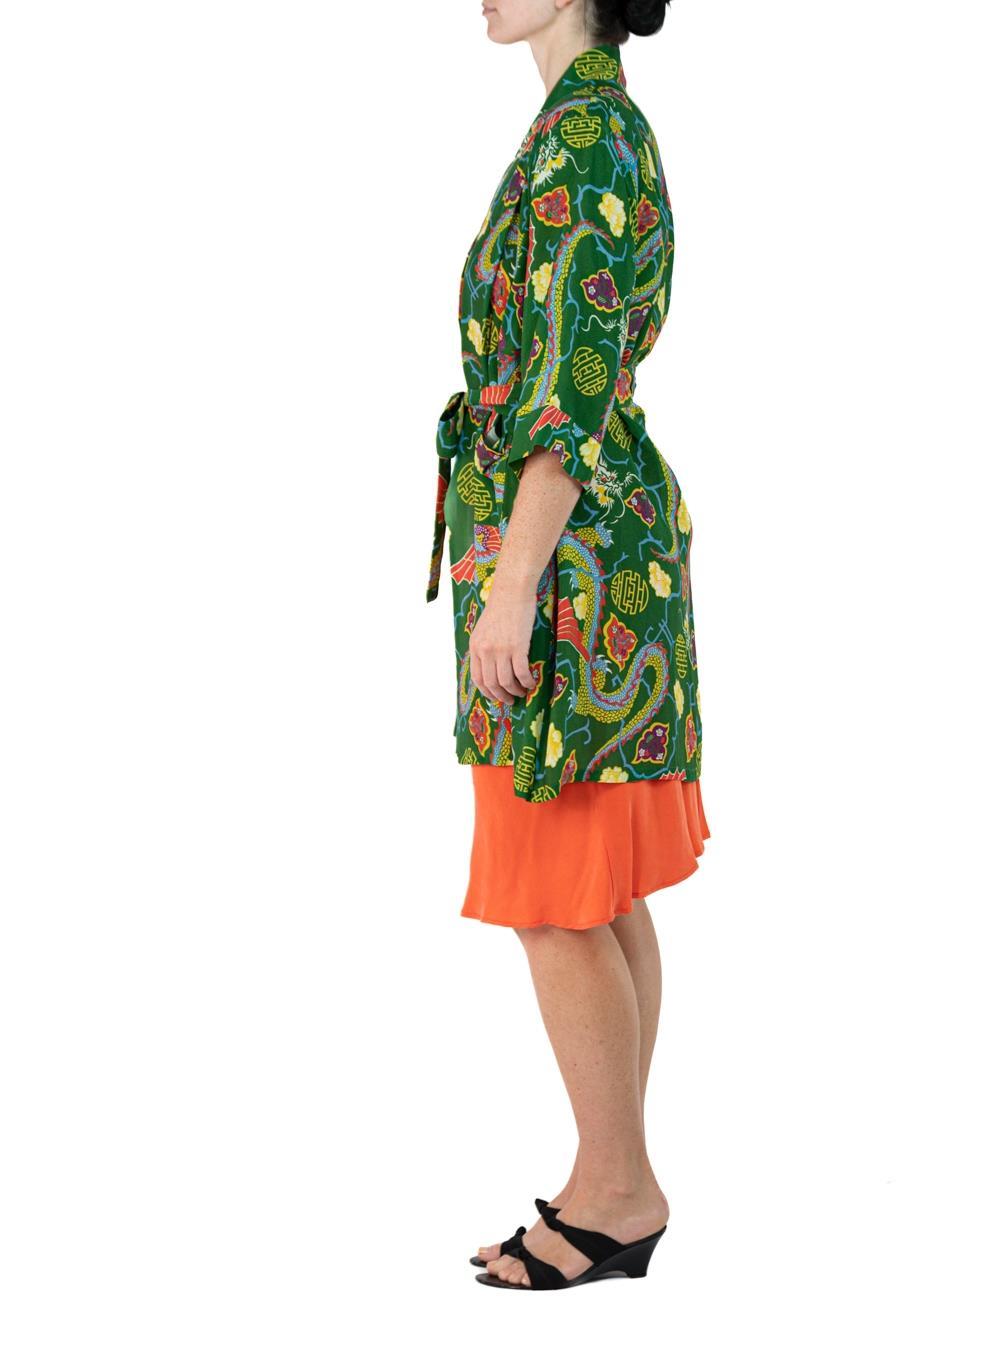 Morphew Collection Green & Orange Dragon Novelty Print Cold Rayon Bias Kimono Os 
MORPHEW COLLECTION is made entirely by hand in our NYC Ateliér of rare antique materials sourced from around the globe. Our sustainable vintage materials represent